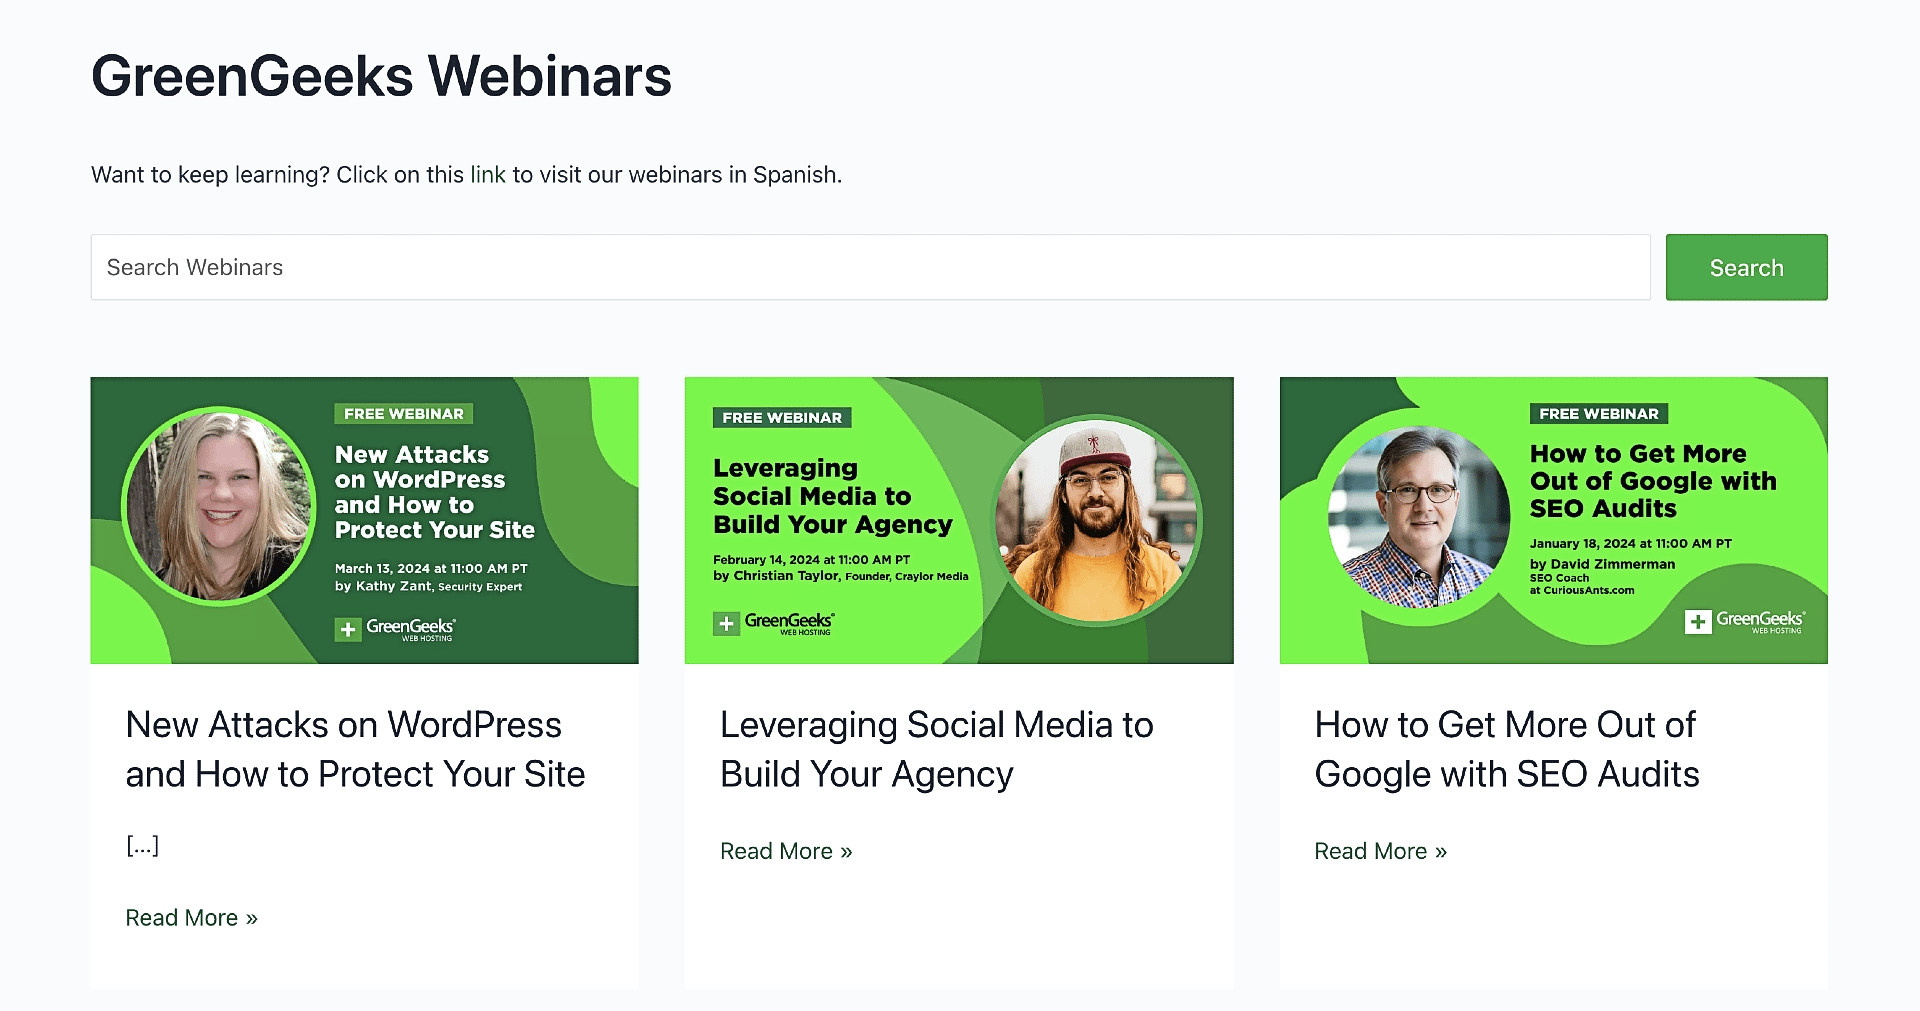 GreenGeeks webinars offers information that is both informative and instructional.